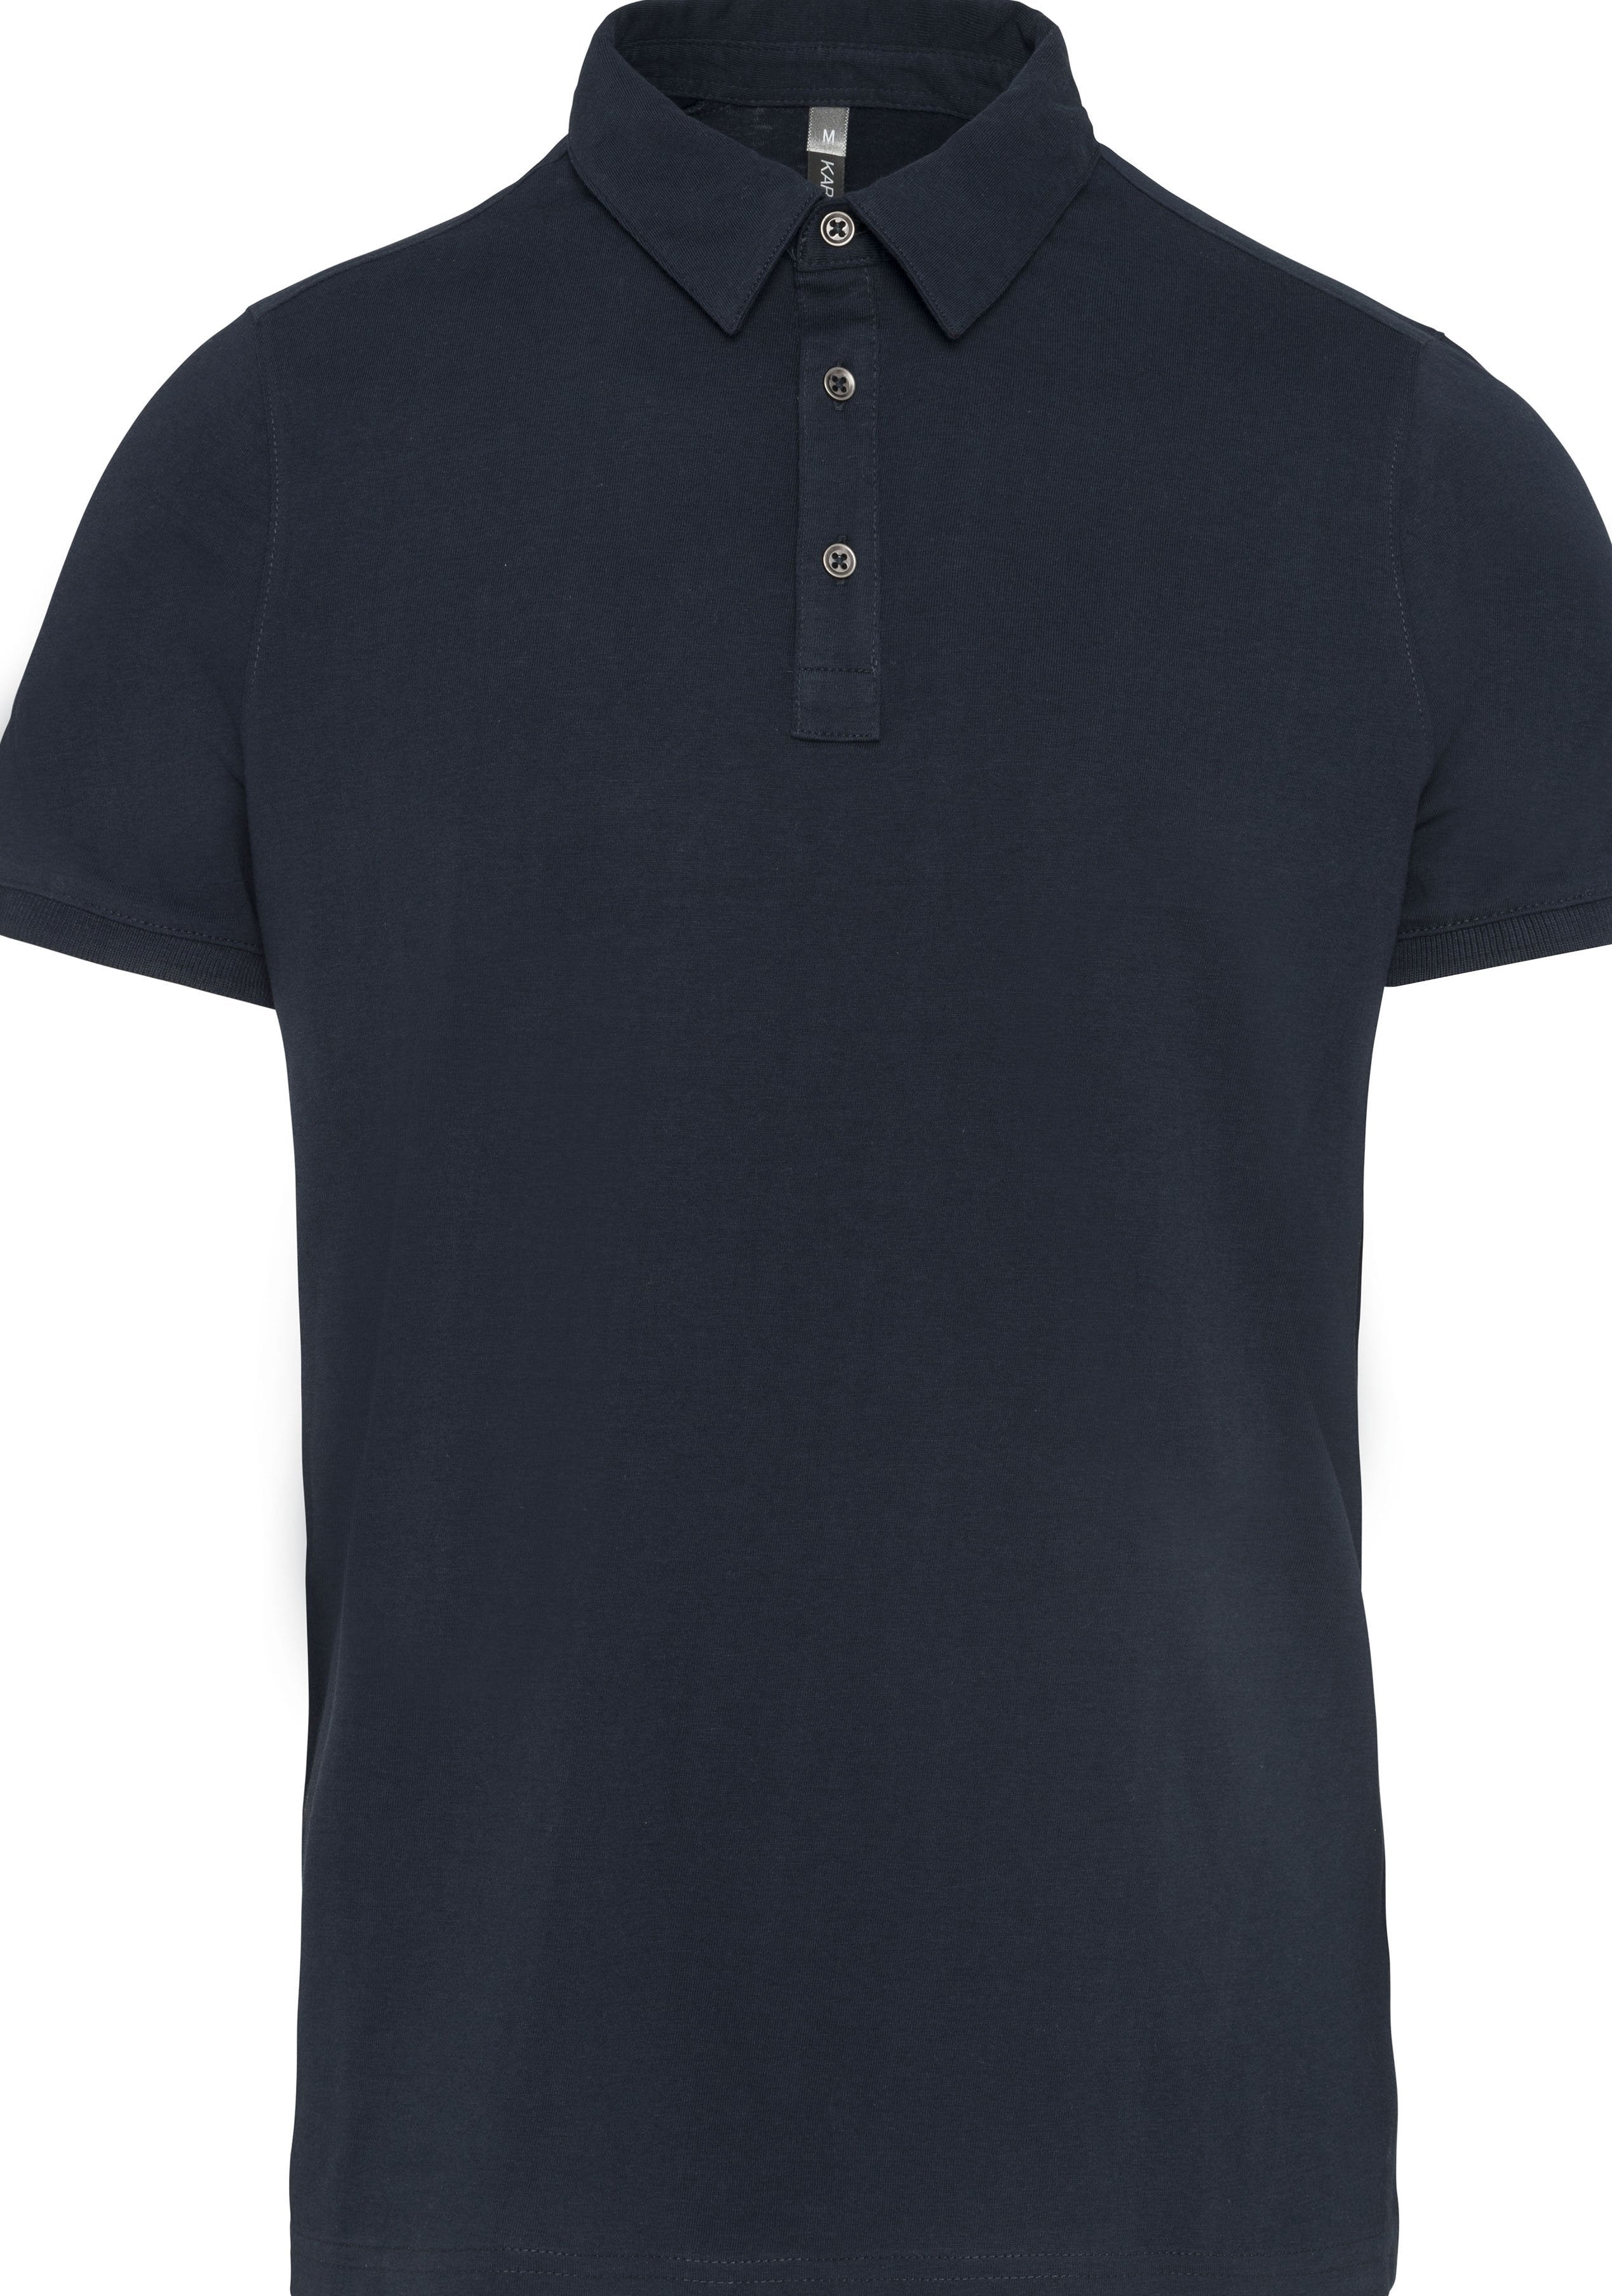 Polo personnalisé manches courtes classique golf- K262 polo homme Fruit of the Loom navy S 